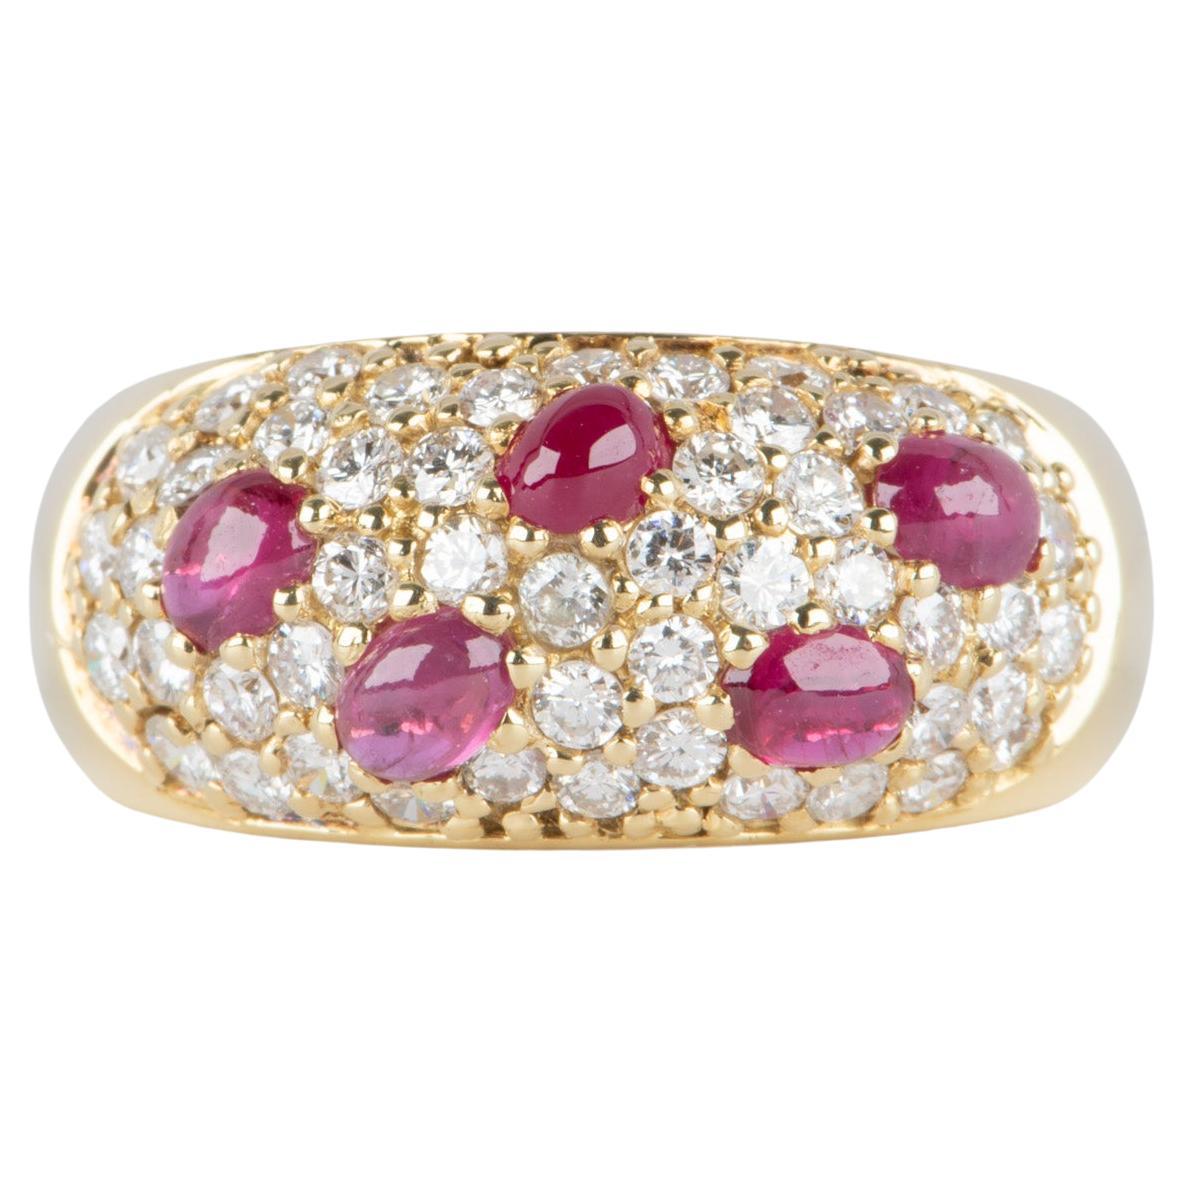 Wide Dome Band with Pave Diamond and Cabochon Ruby 18K Gold 6.6g V1117